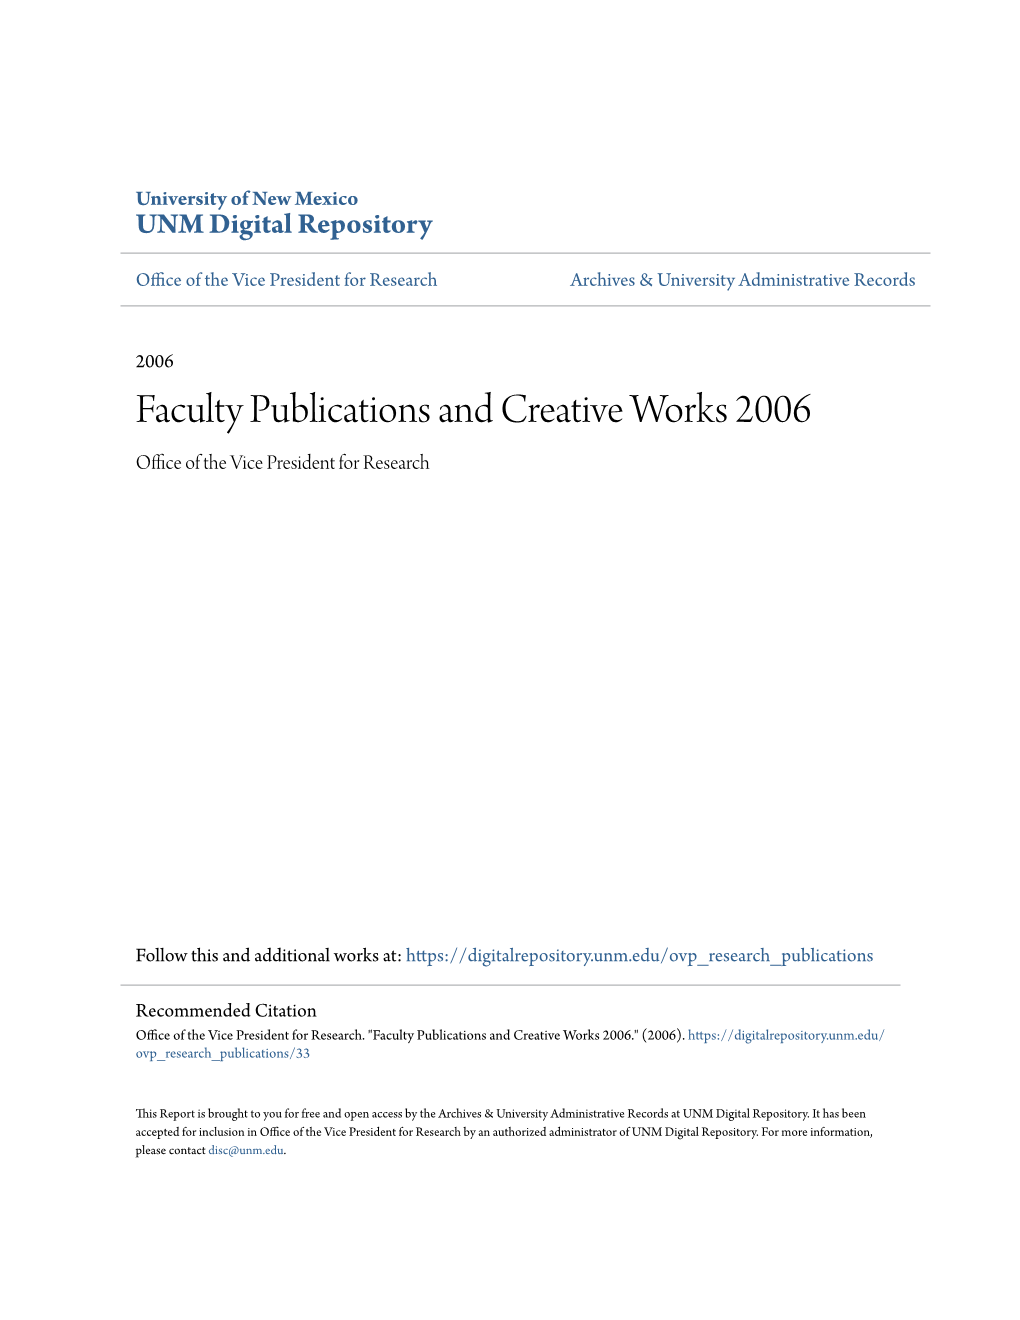 Faculty Publications and Creative Works 2006 Office of Theice V President for Research